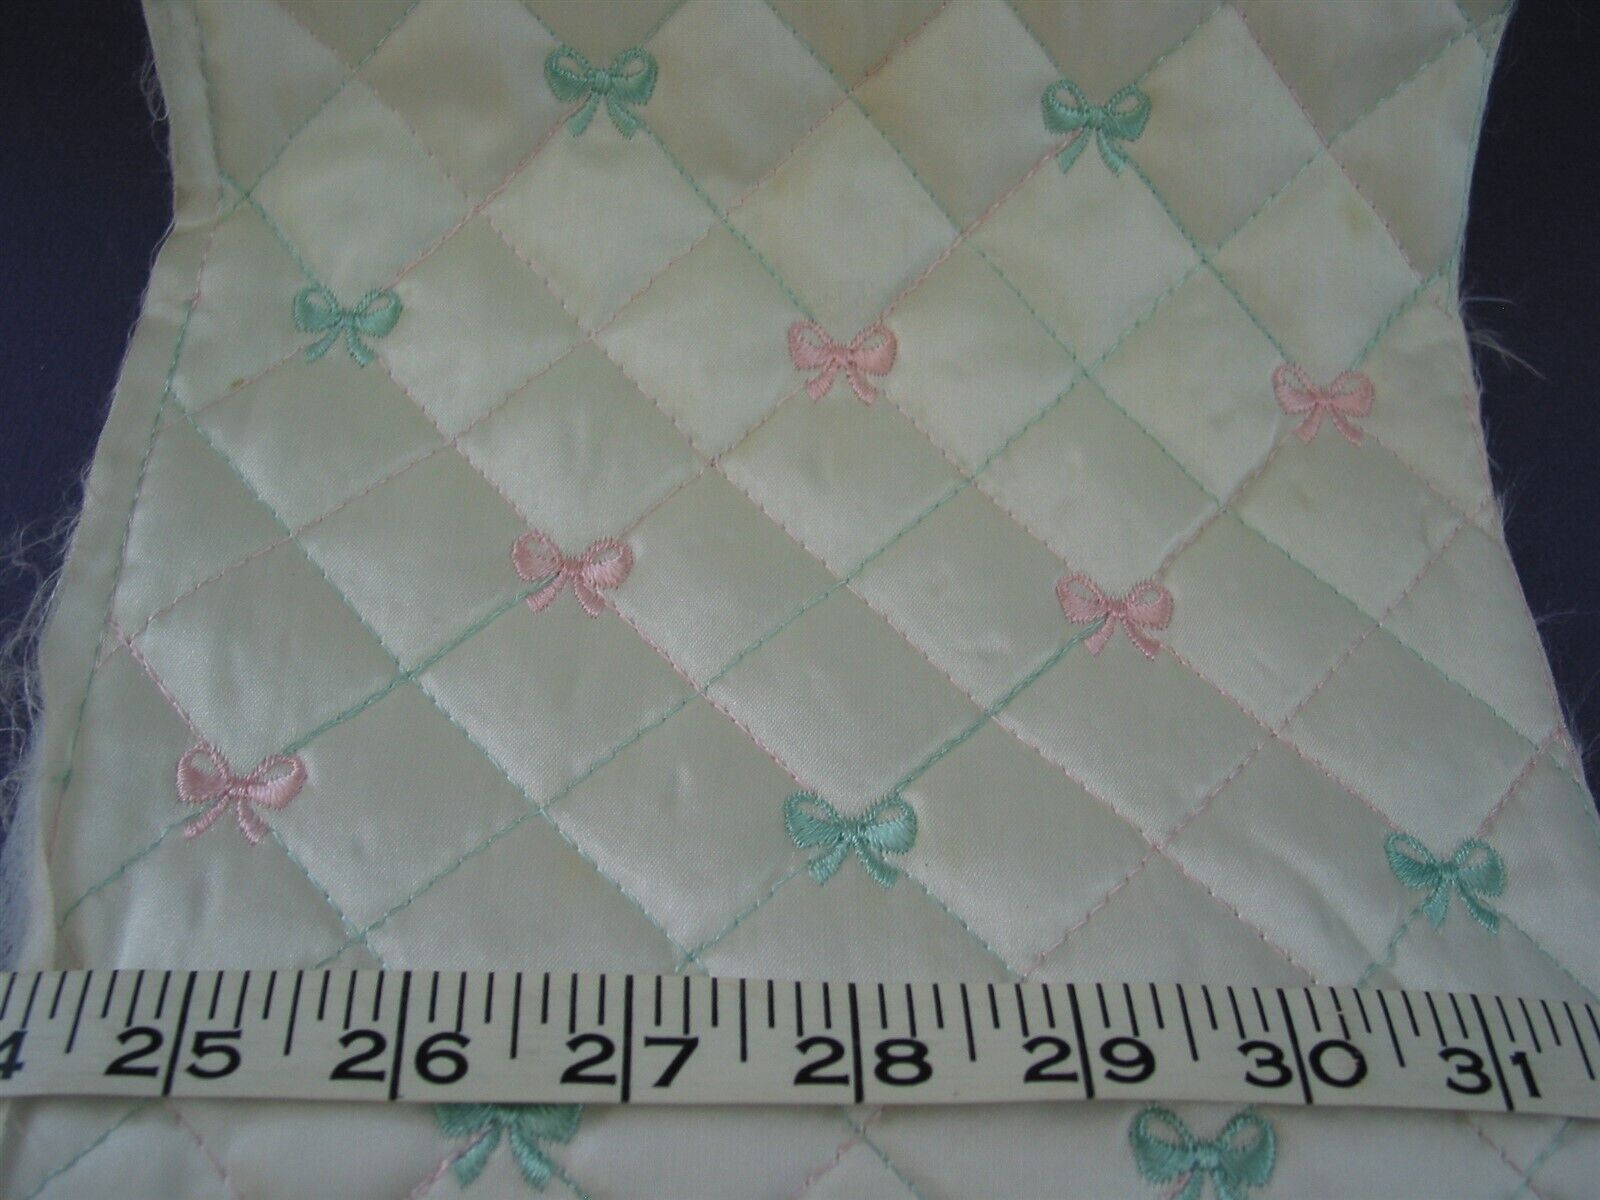 2864 Embroidered Trim Quilted Creamy Satin W Bows 8 1/4" 6 Yds